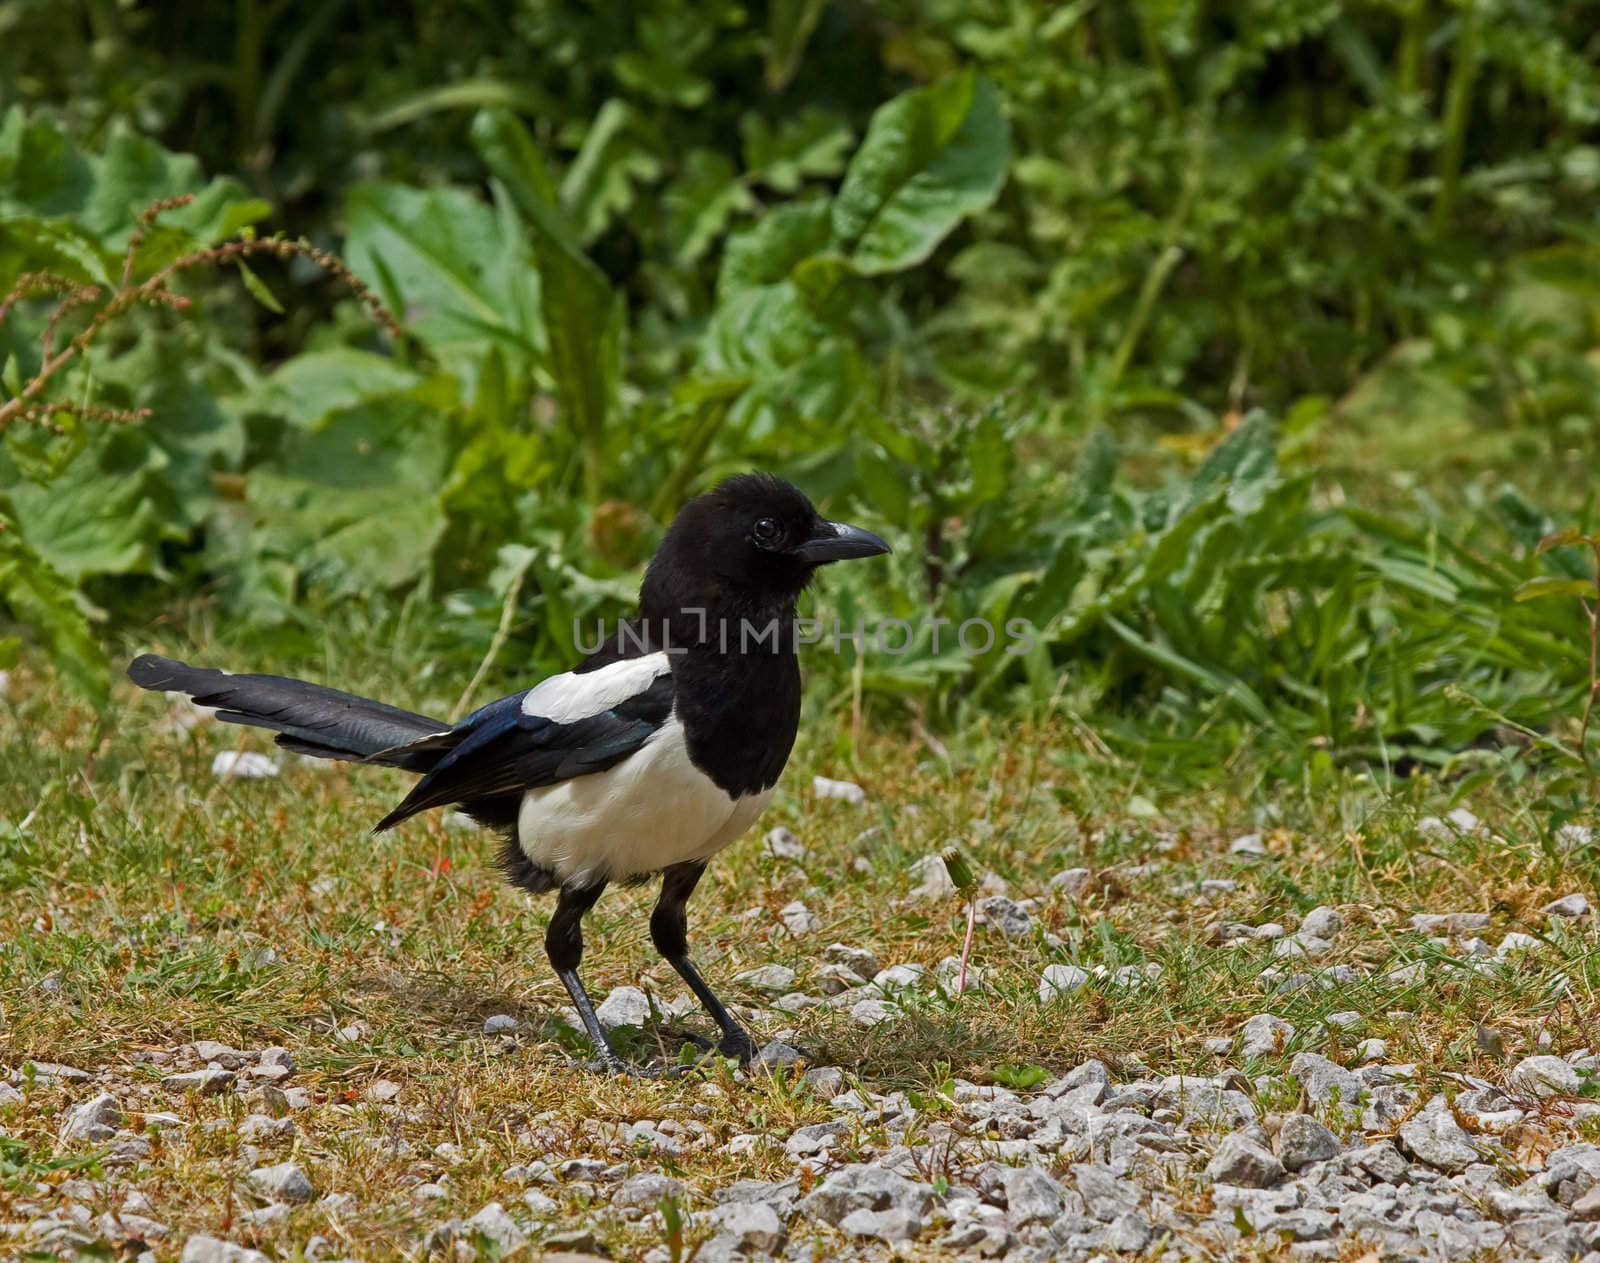 Common Magpie at Castle Hill in Newhaven, East Sussex, England.